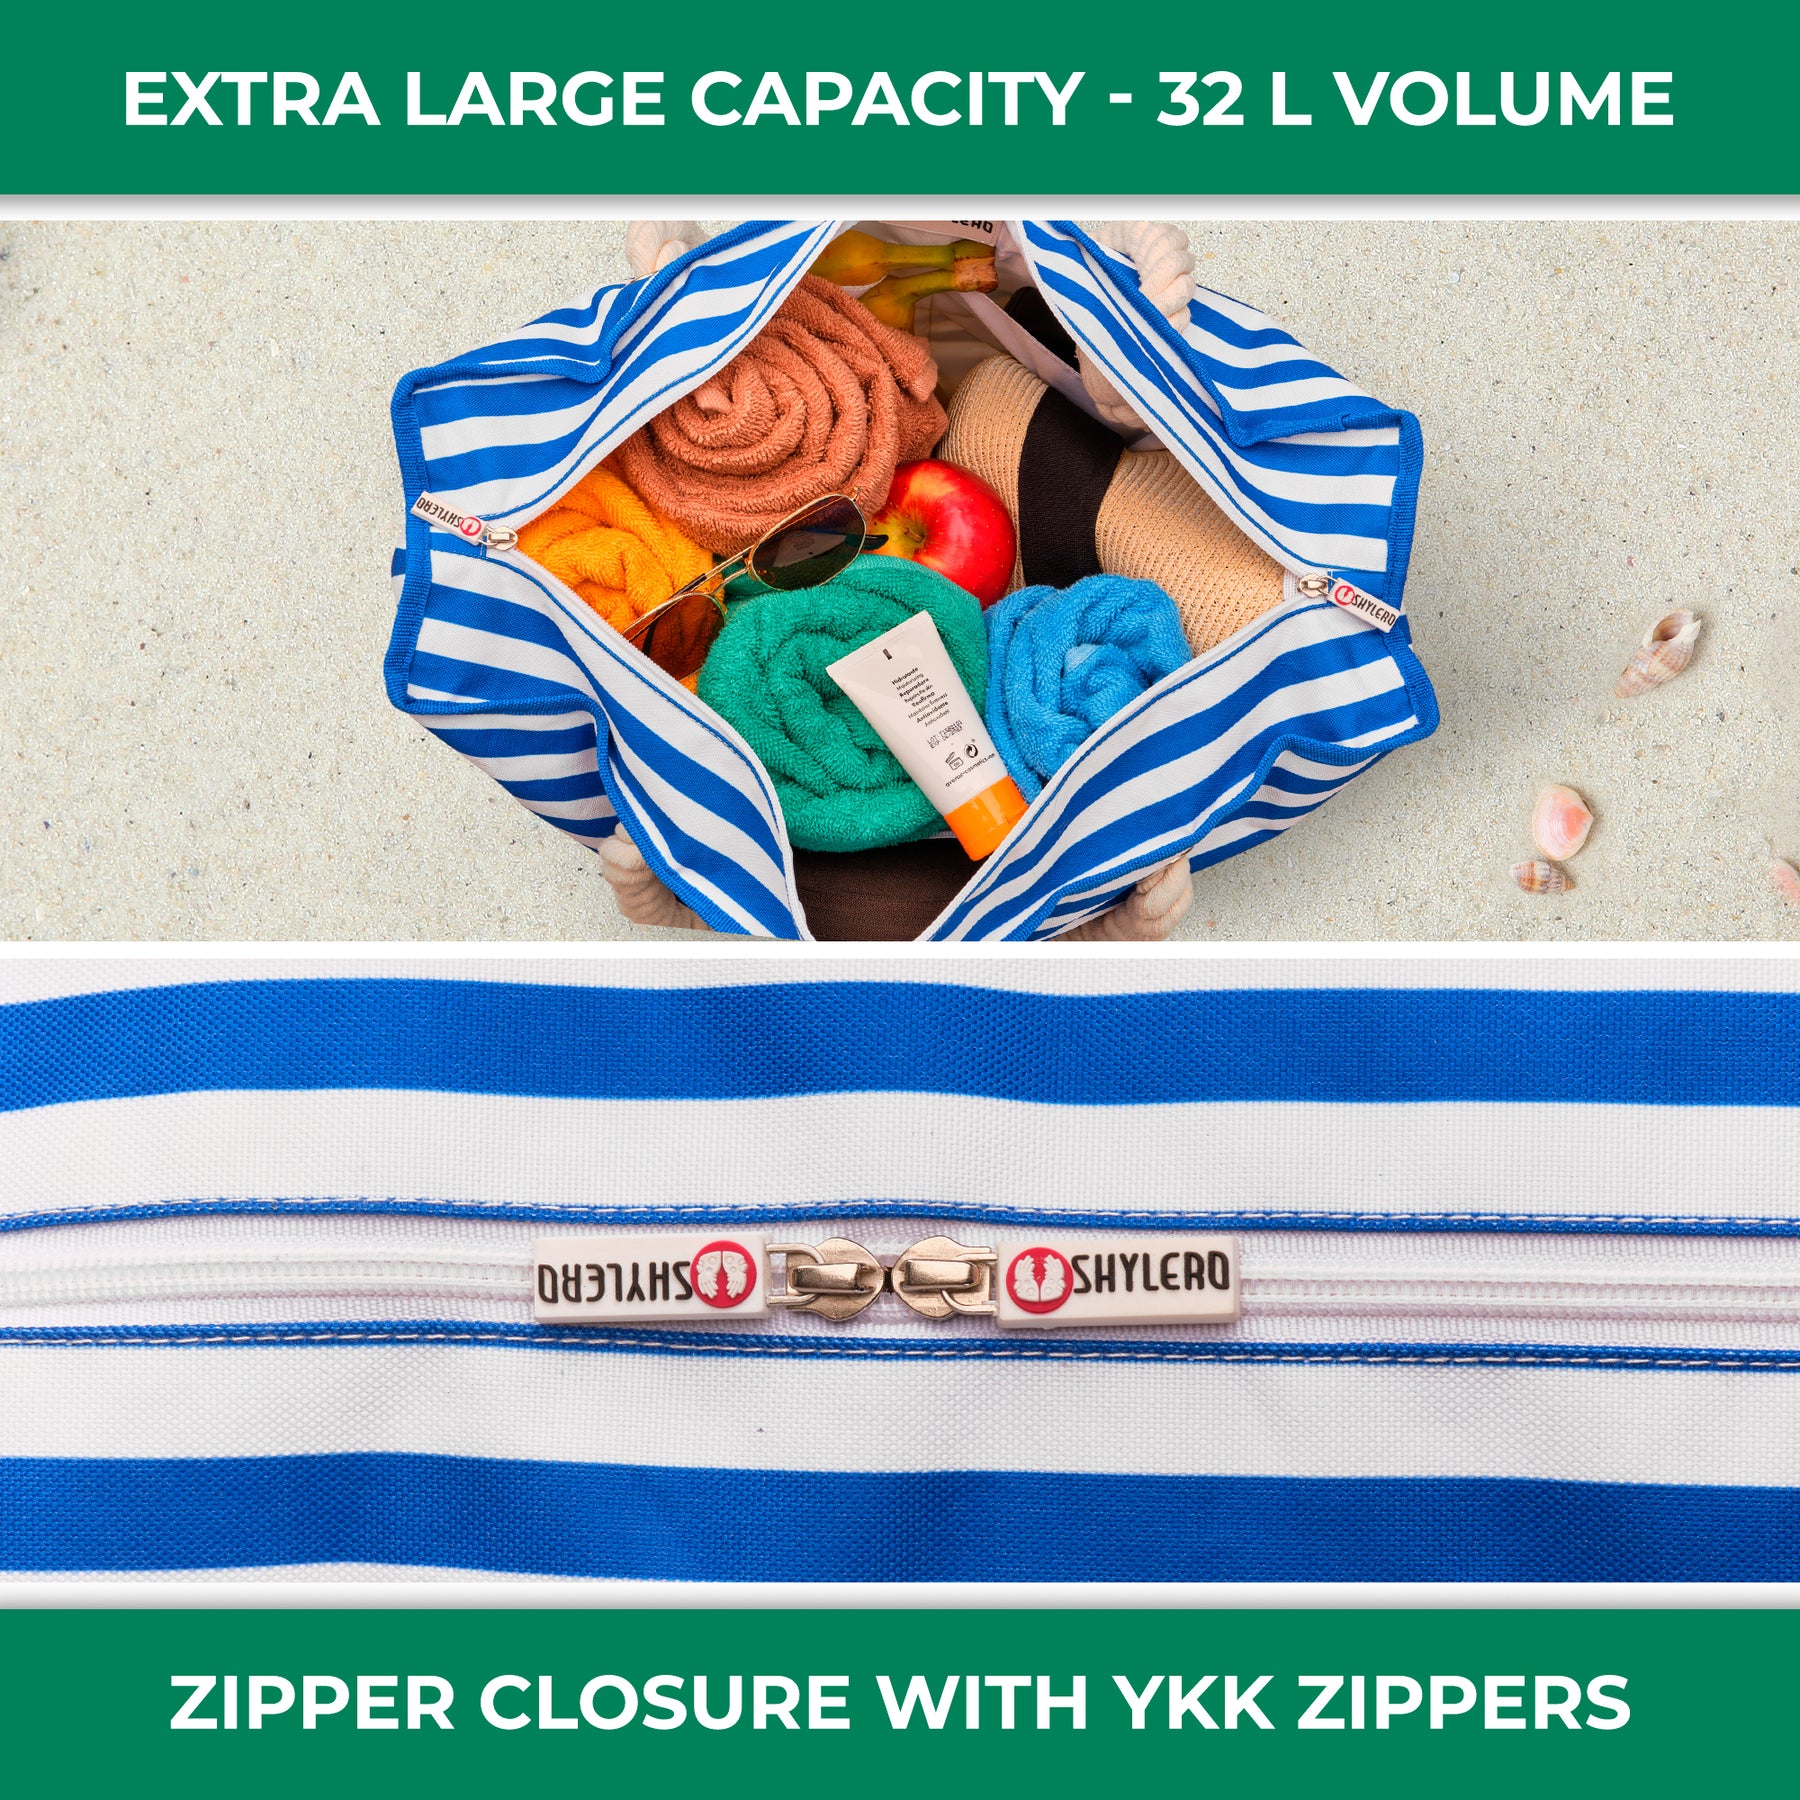 Beach Bag and Pool Bag | Water Repellent | Top YKK® Zip | Family Size | L22" x H15" x W6" | Bright Blue Lobster